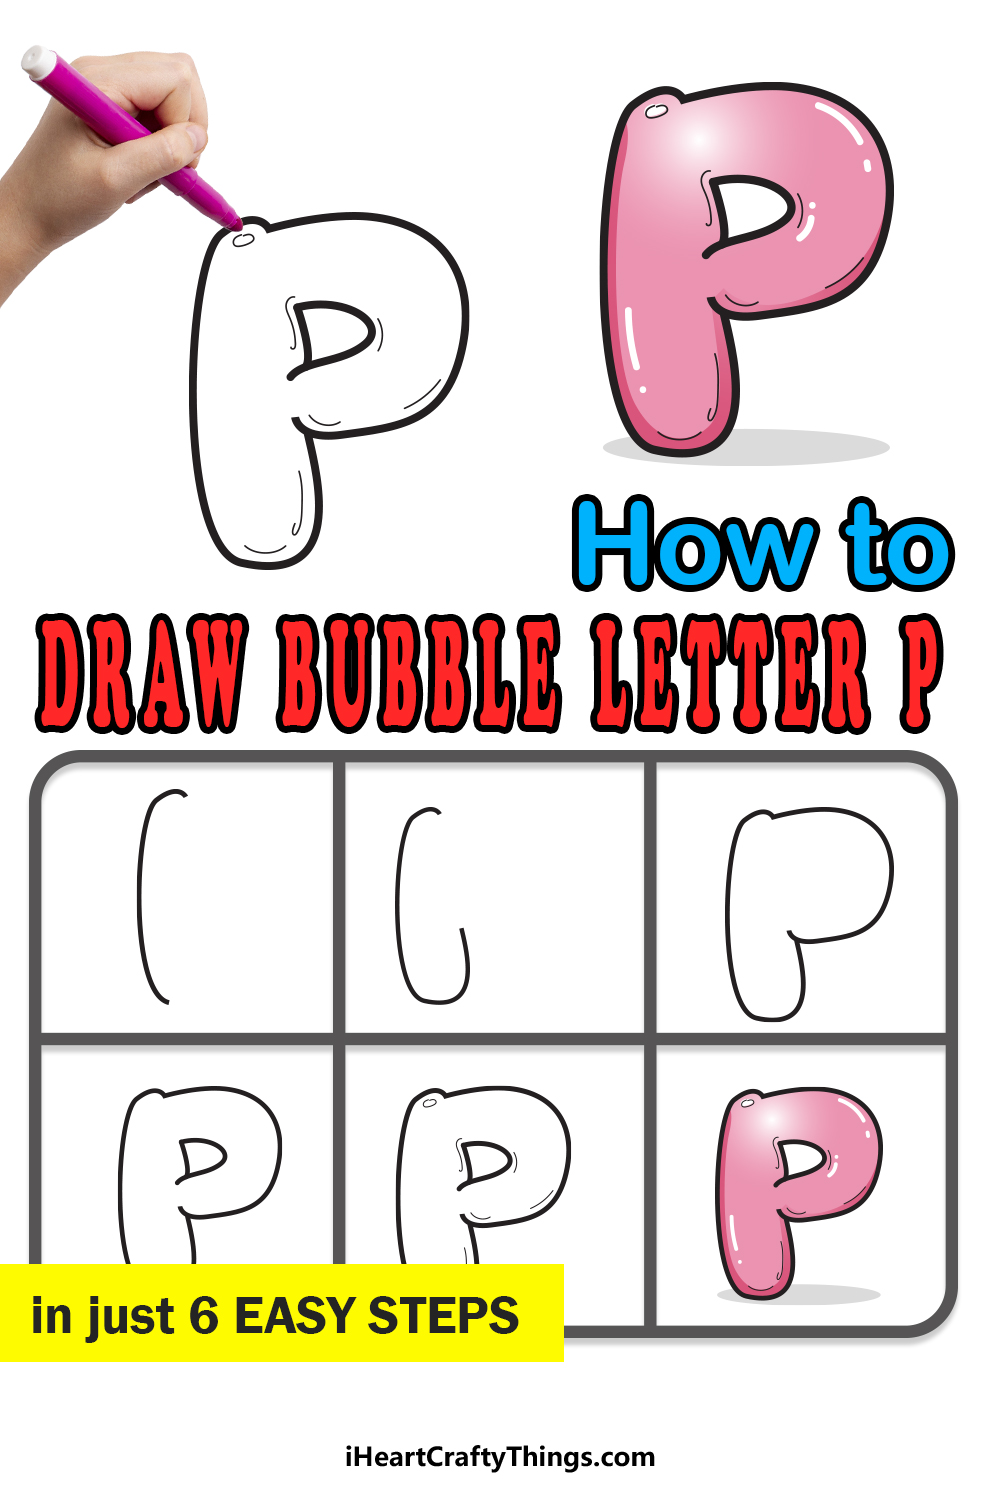 How To Draw Your Own Bubble P step by step guide